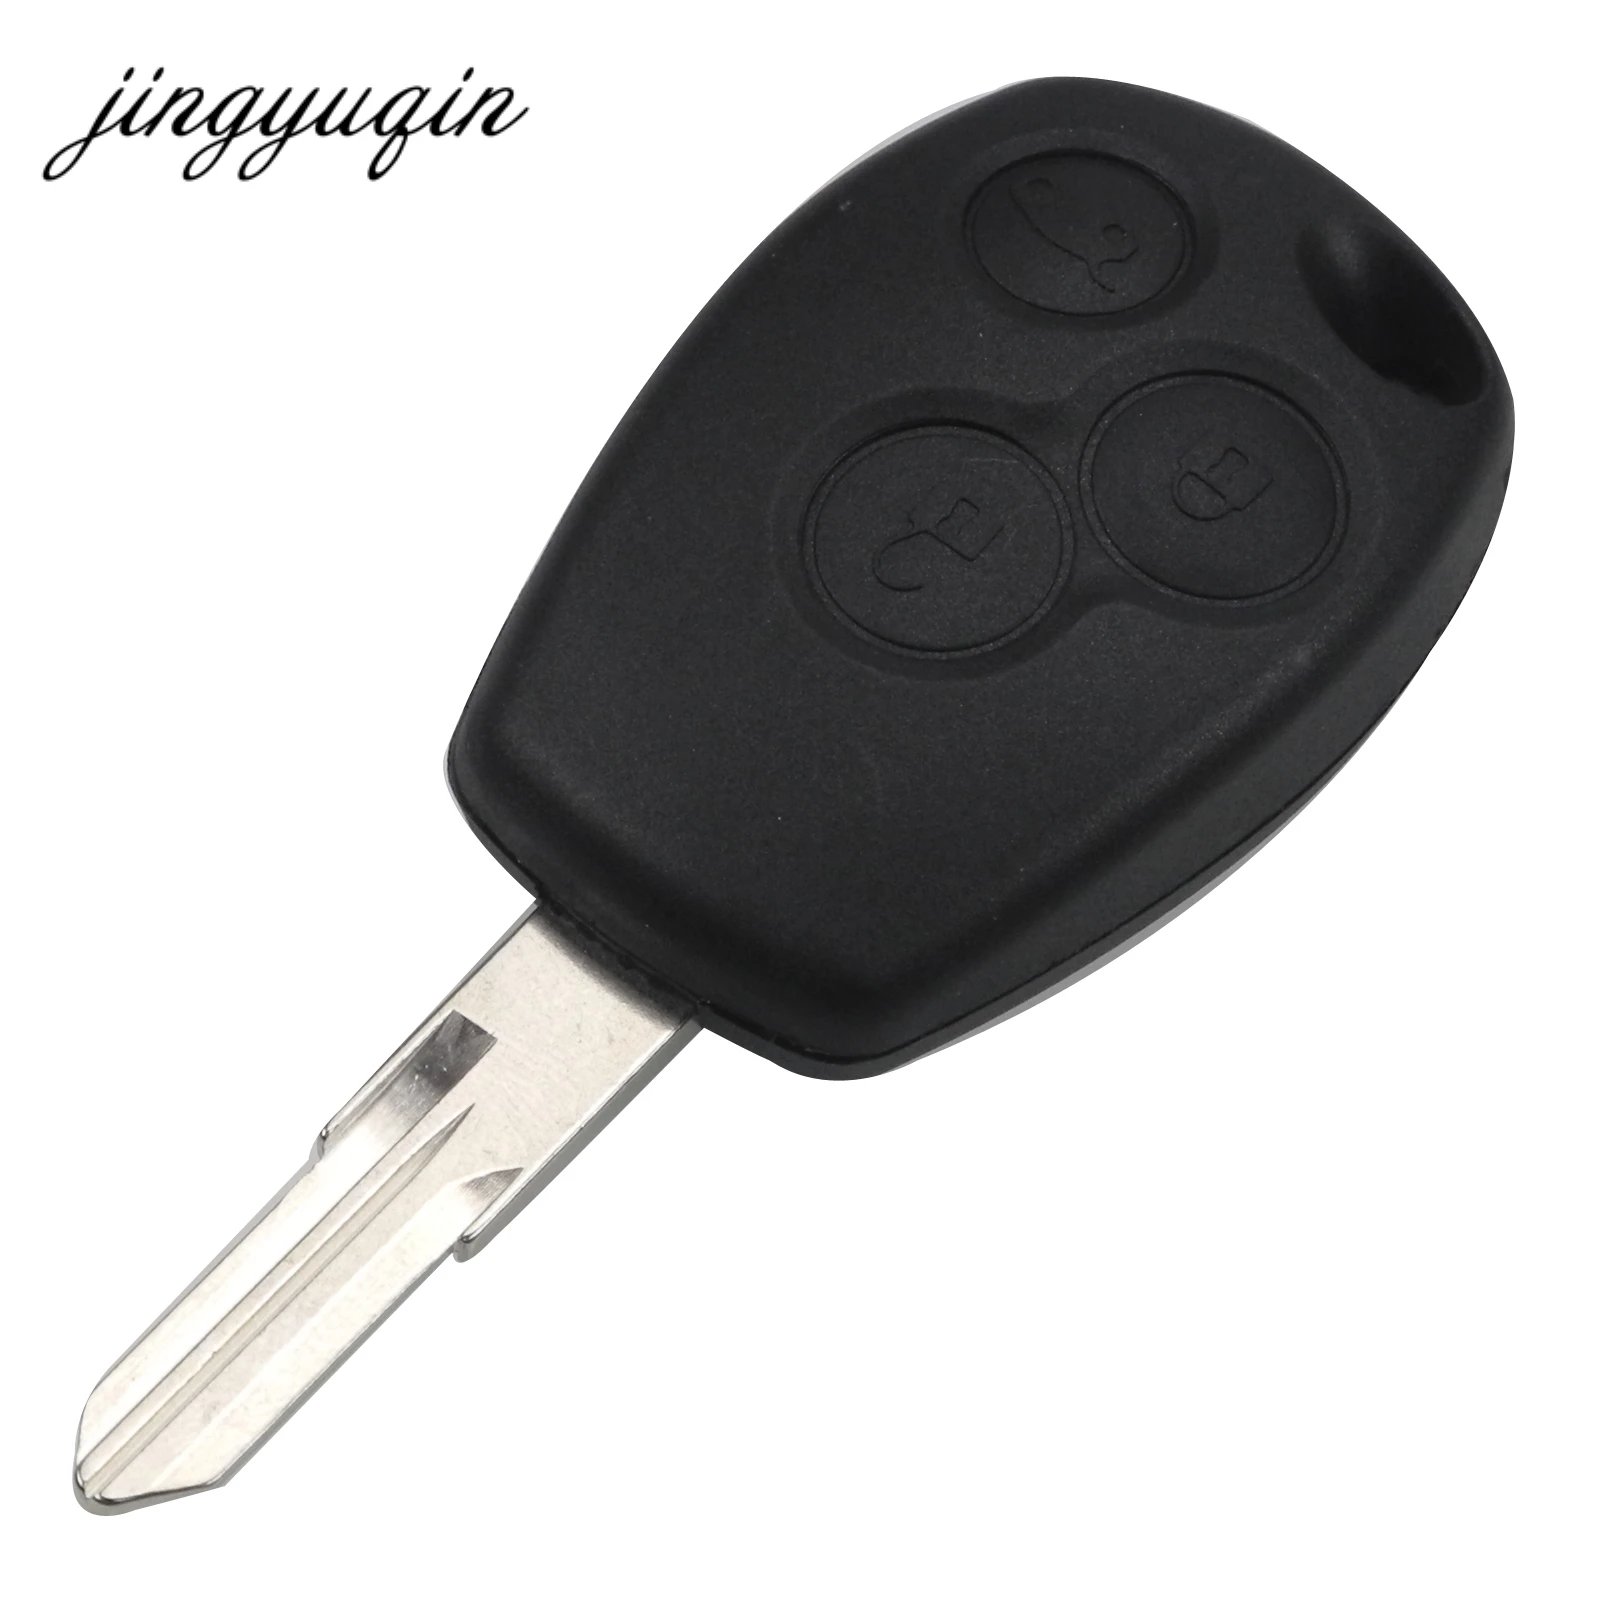 

jingyuqin 50pcs/lot VAC102 Blade Car Key Covers Uncut Blade for Renault 3 Buttons Duster Logan Fluence Clio Replacement